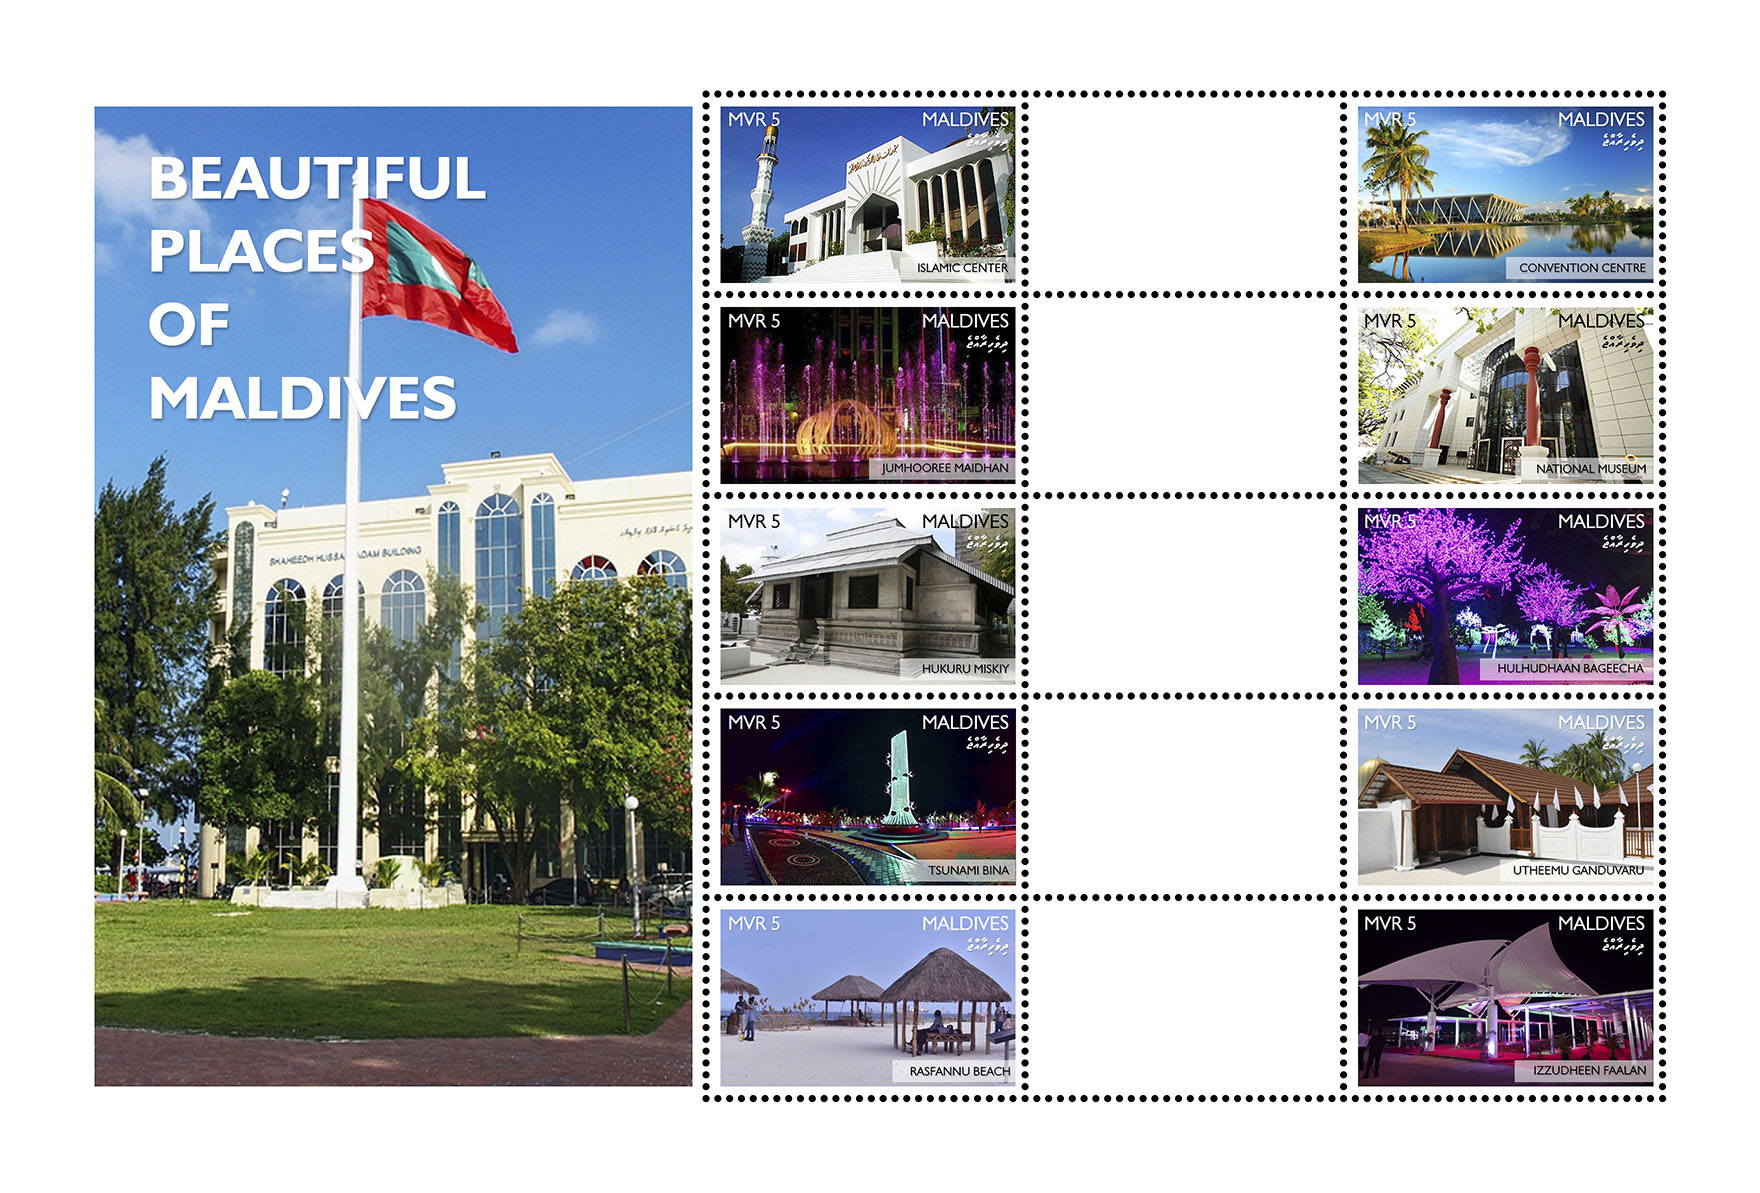 Beautiful Places of Maldives - Issue of Maldives postage stamps